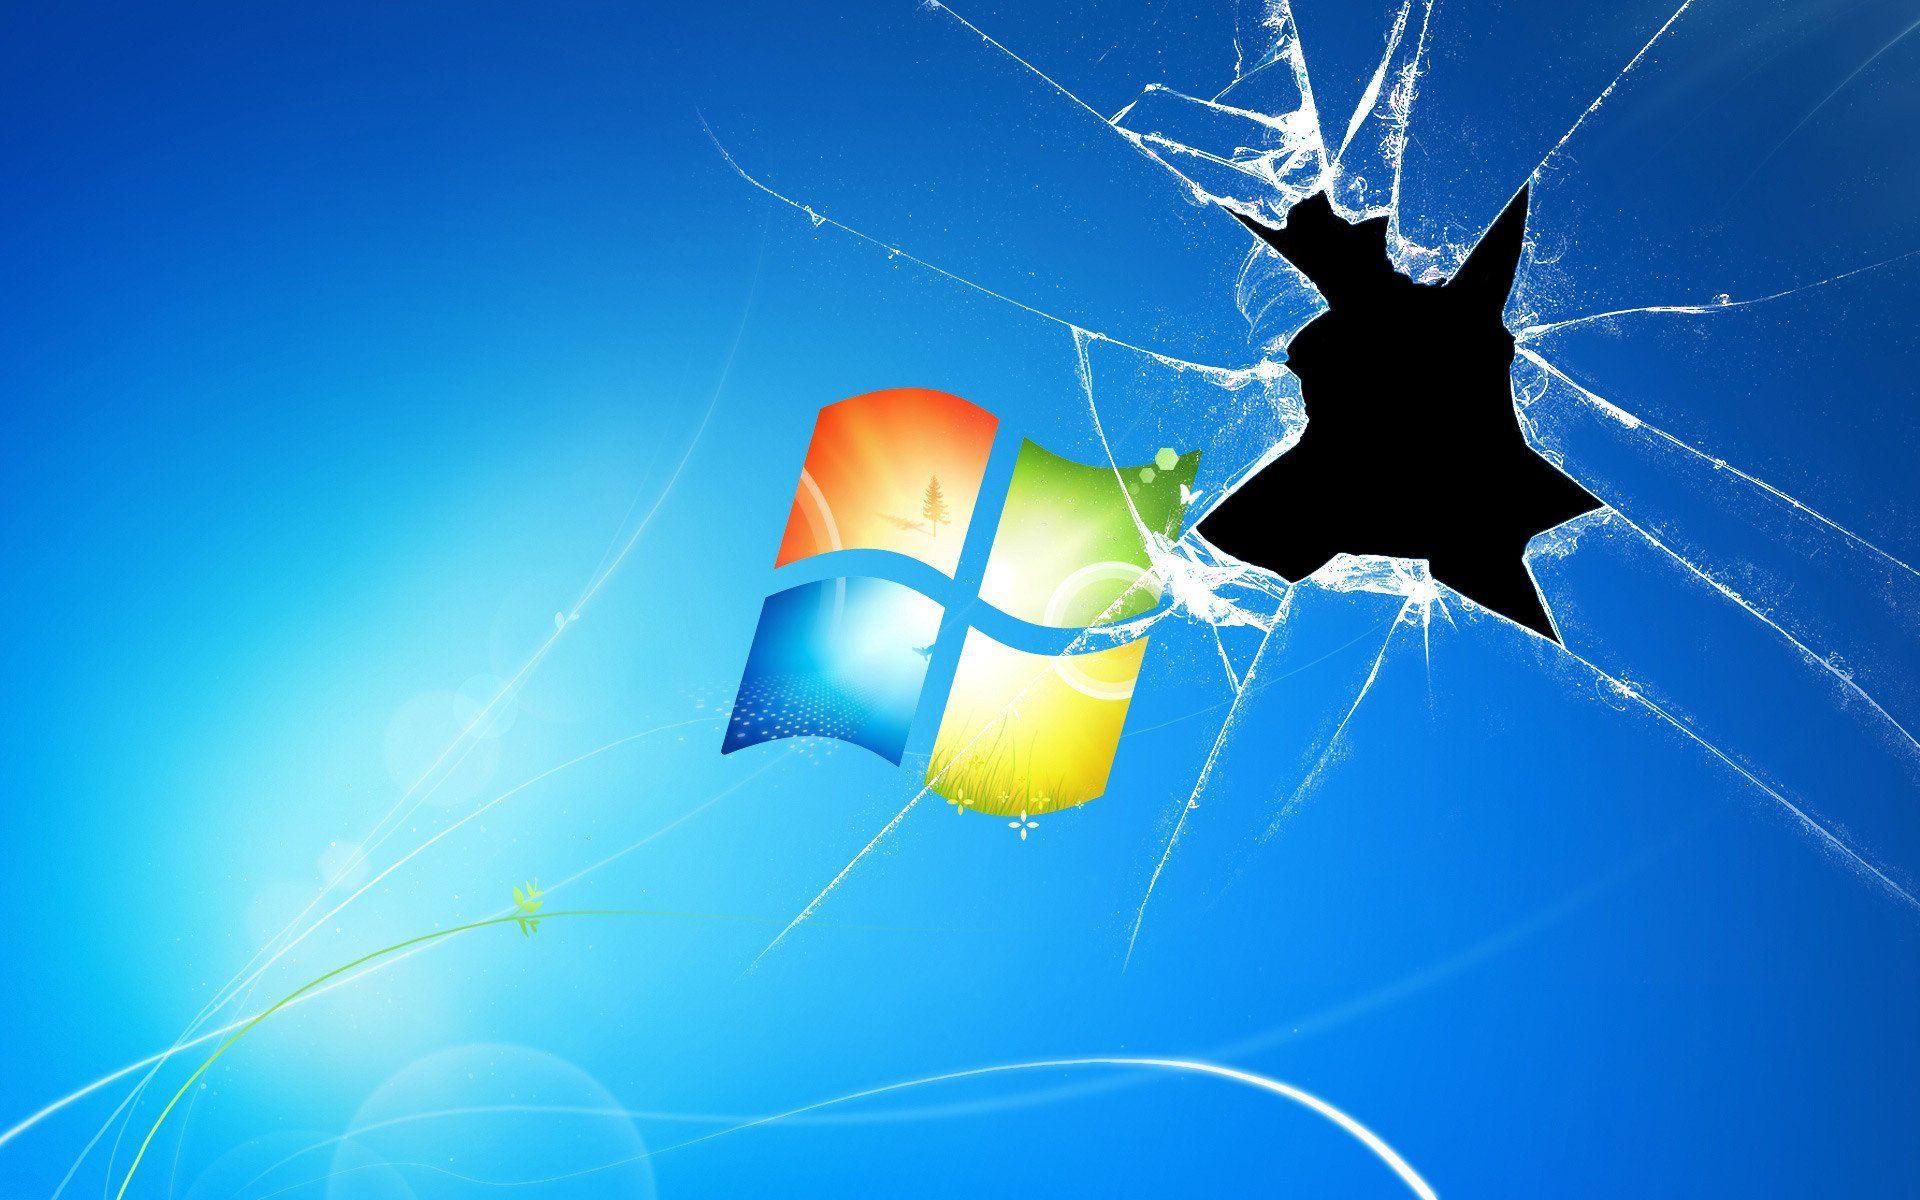 Cracked Screen wallpaper, Technology, HQ Cracked Screen picture